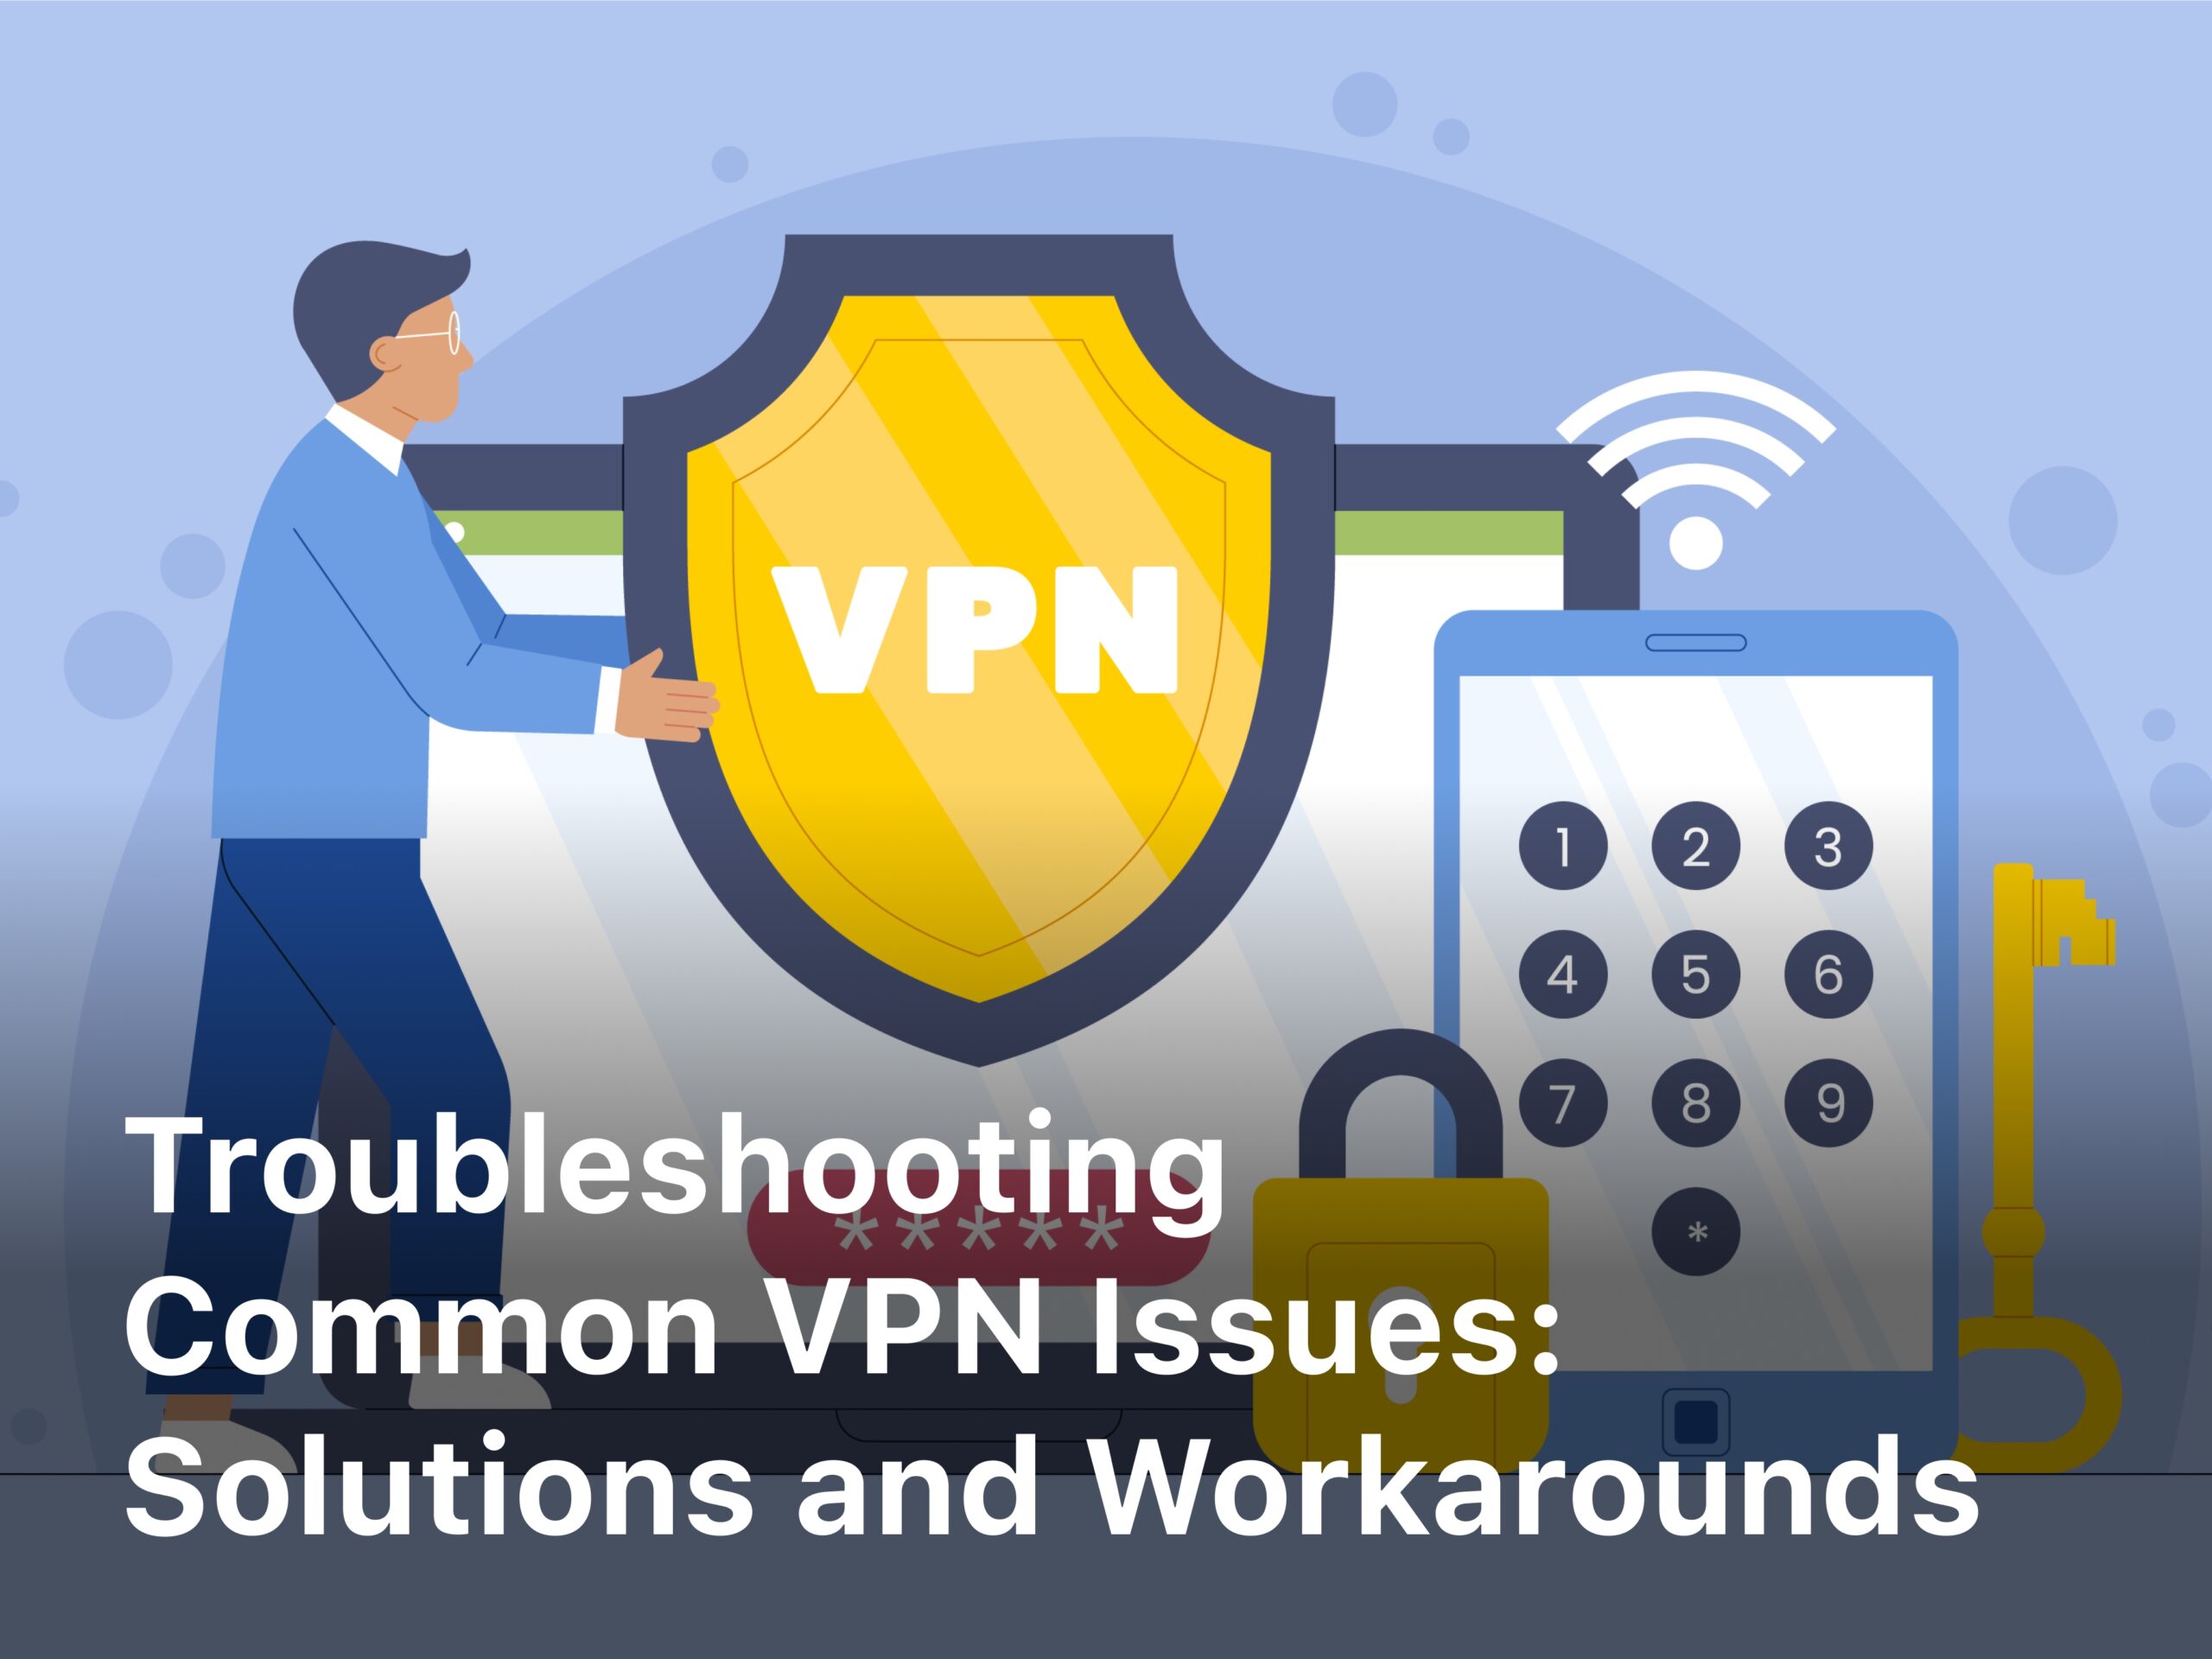 Troubleshooting common VPN issues